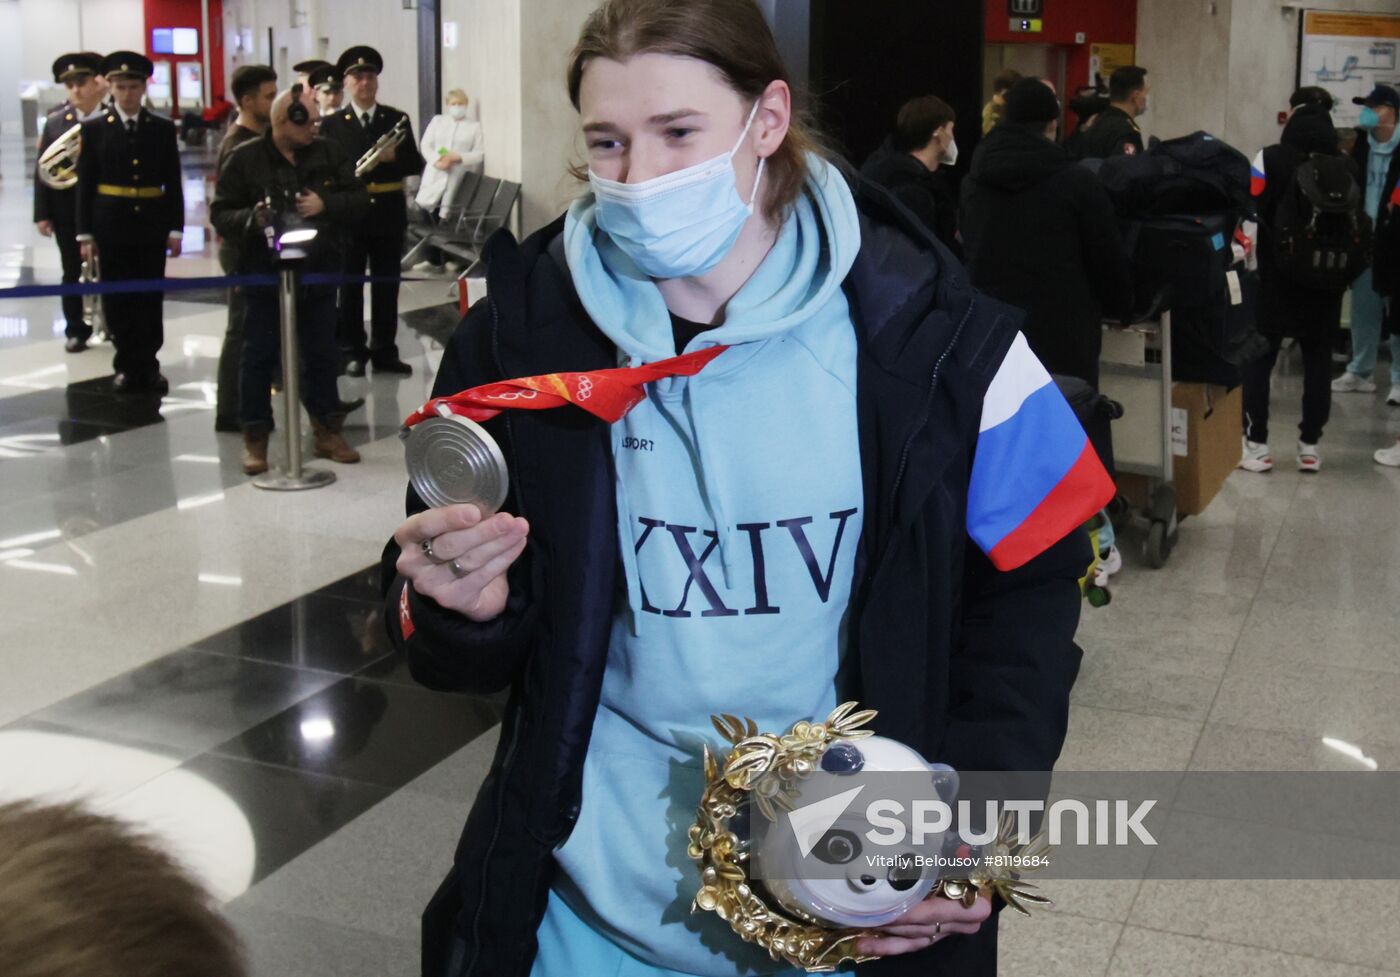 Russia Olympics 2022 Athletes Arrival